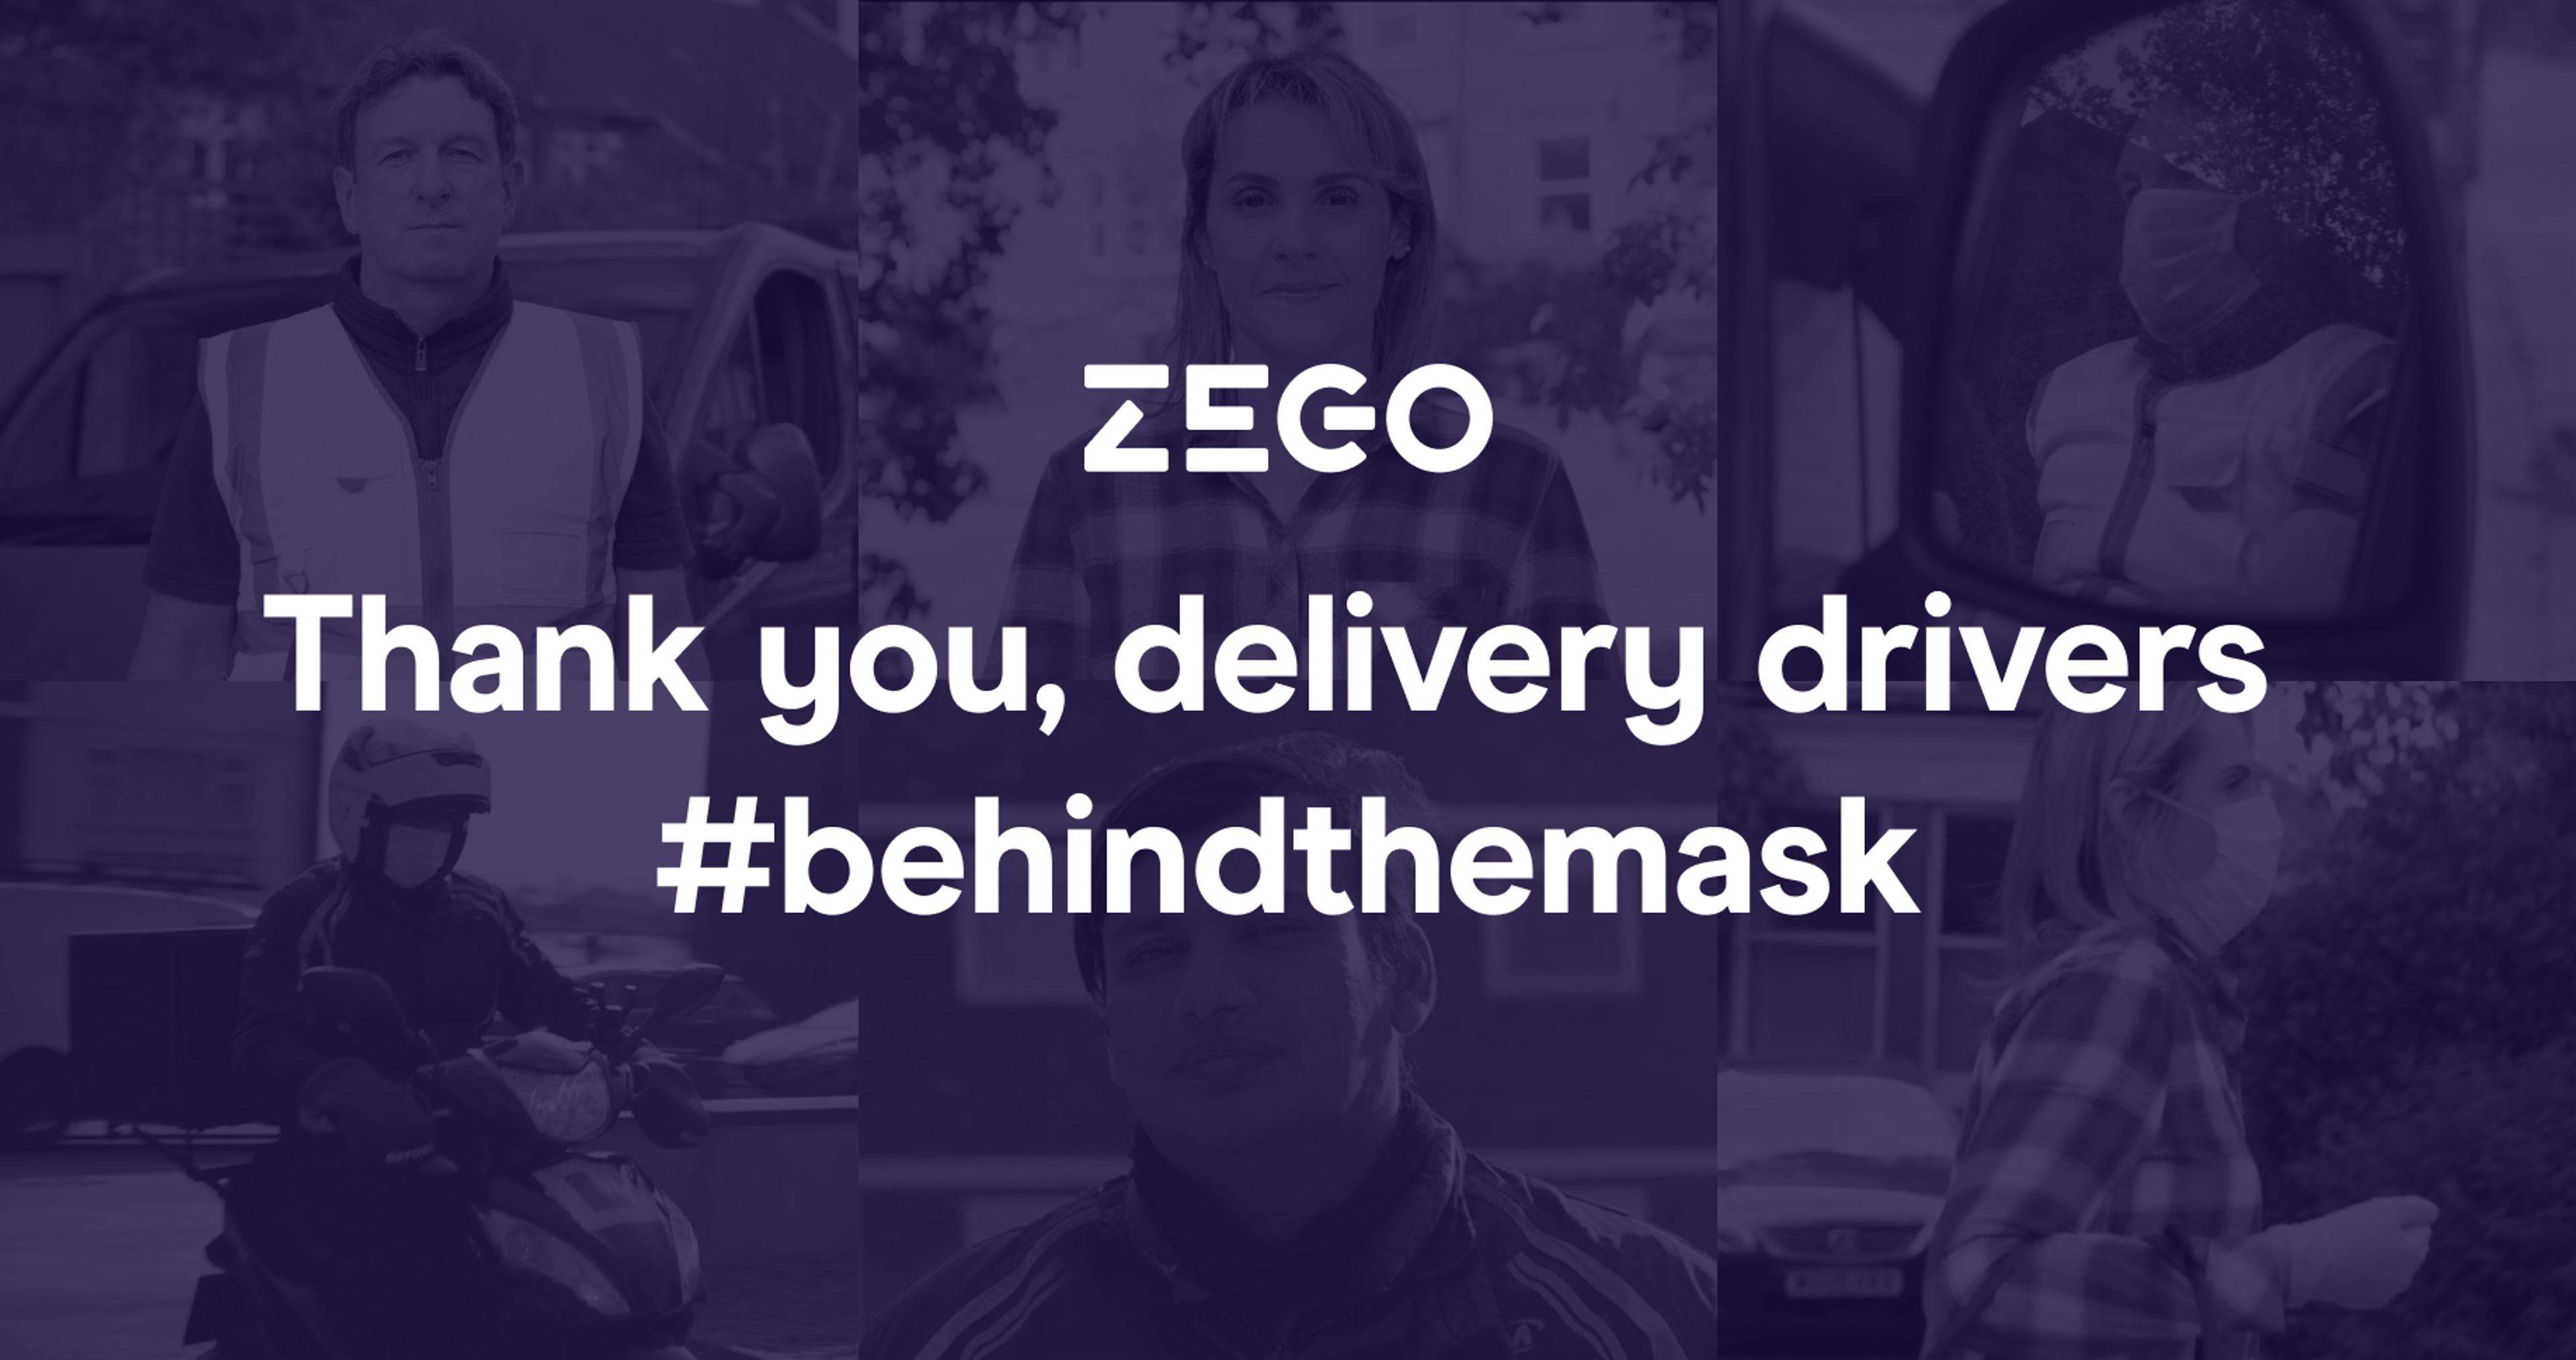 Thank you, delivery drivers #behindthemask